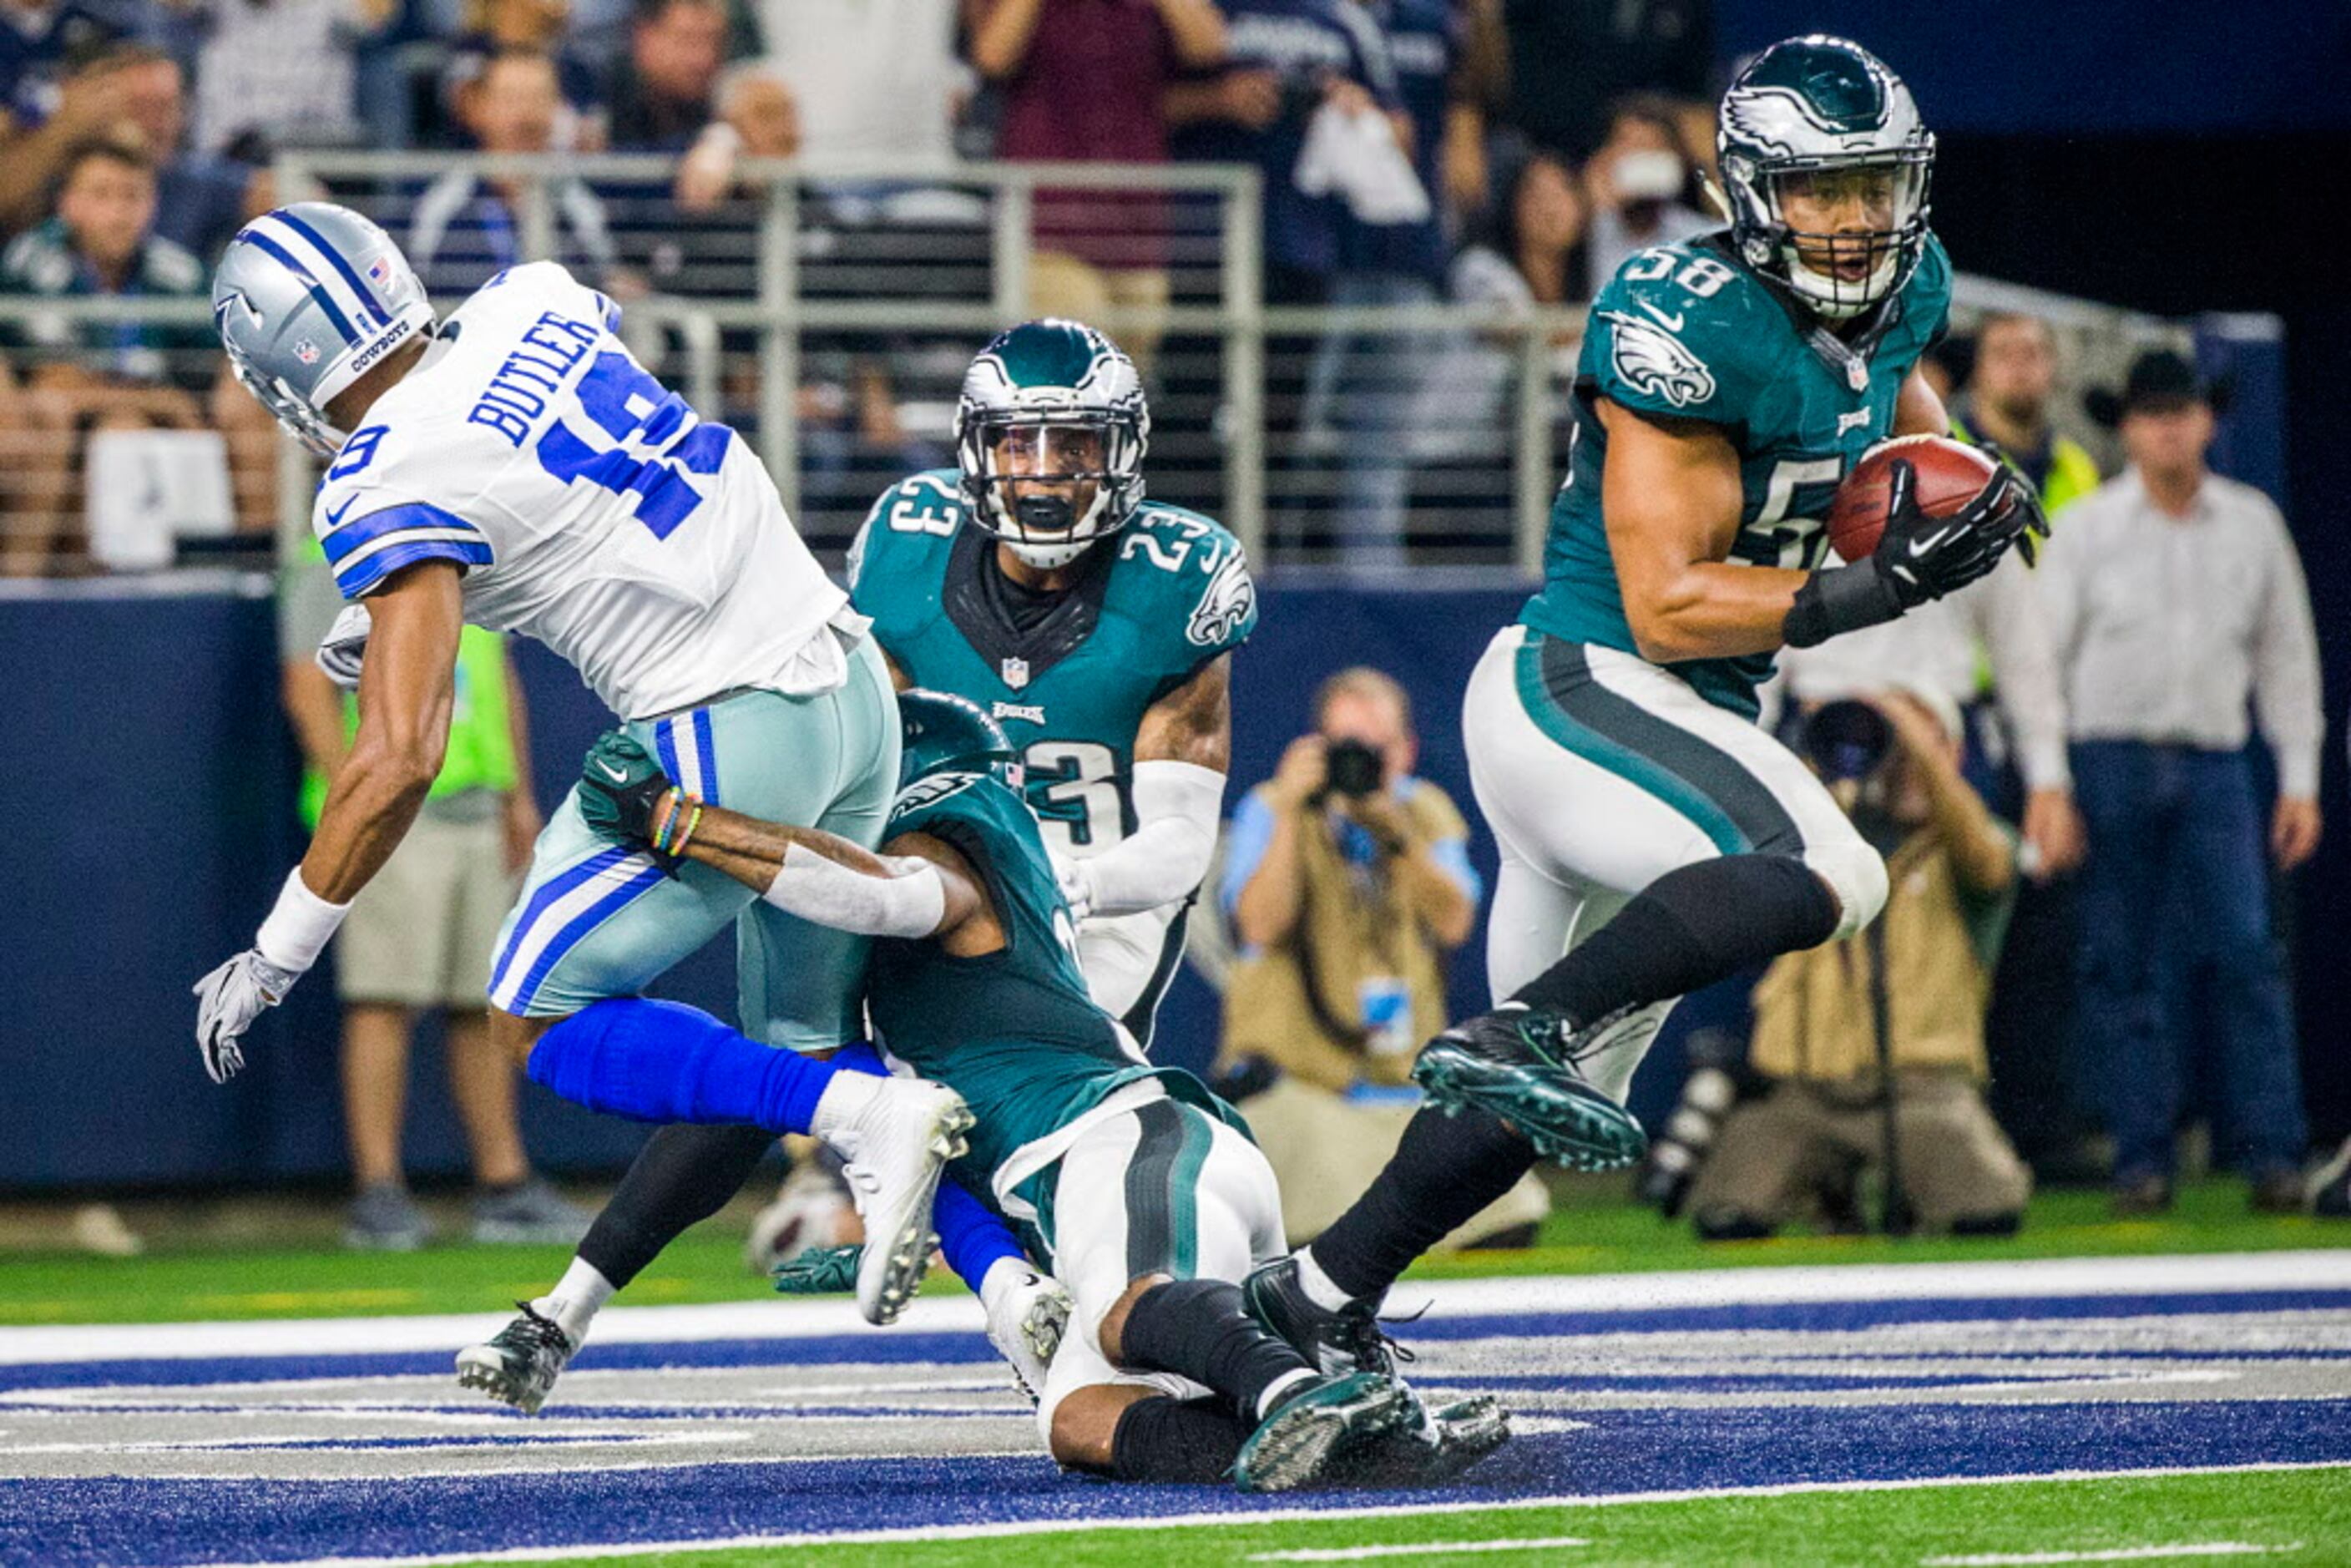 Top 10 Cowboys-Eagles quotes: Dak's a 'pro,' Witten's a 'Hall of